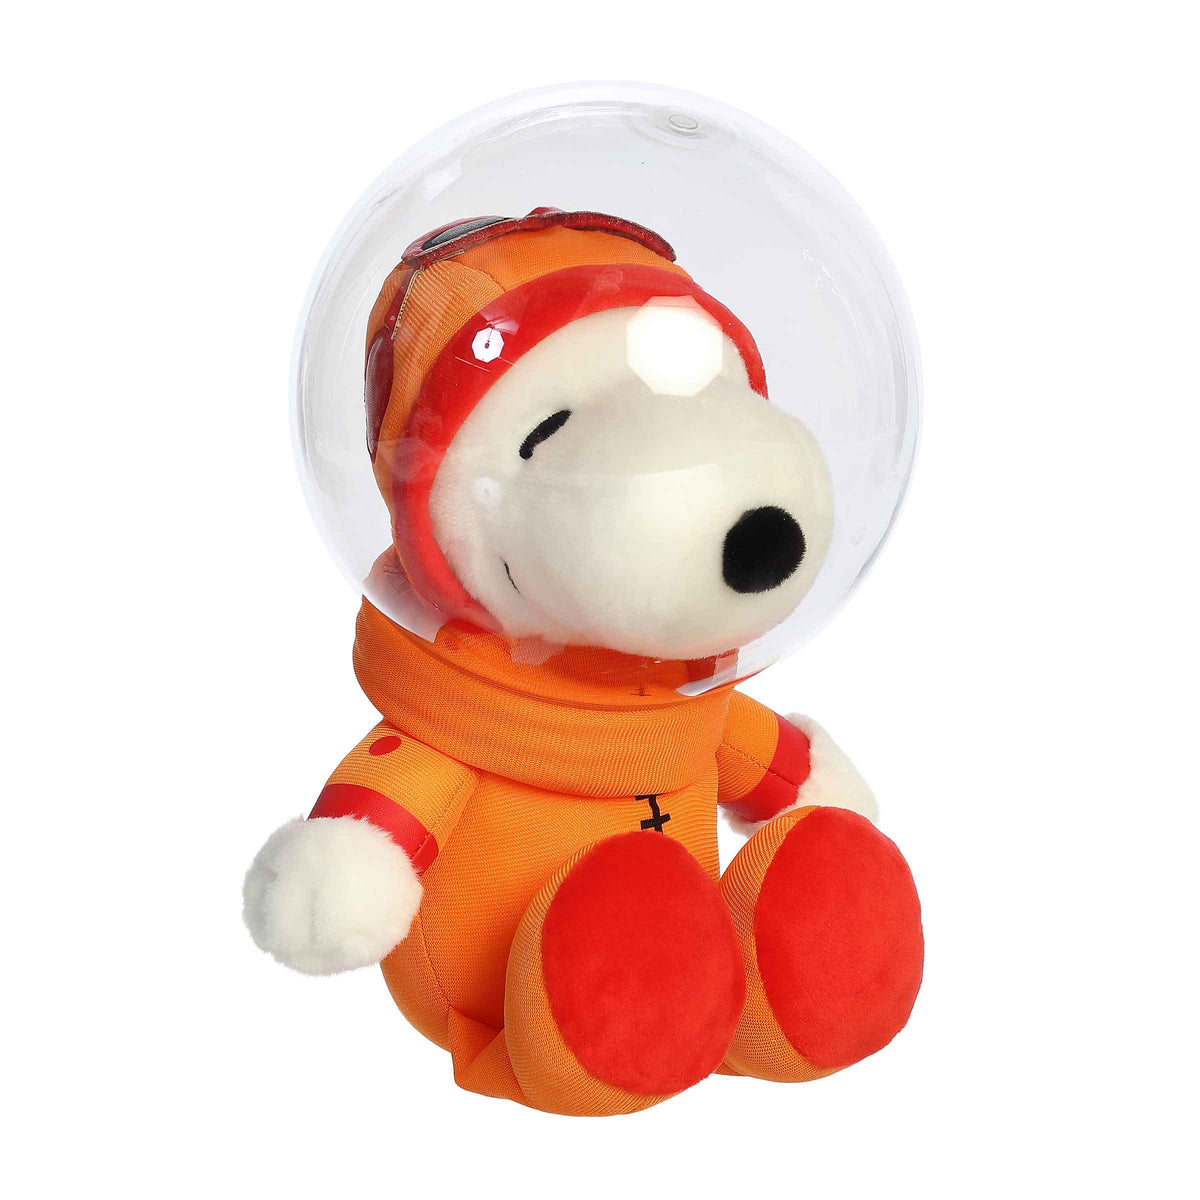 Astronaut Snoopy plush by Aurora from the Peanuts plush collection, in a red space suit with a helmet, cosmic fun!